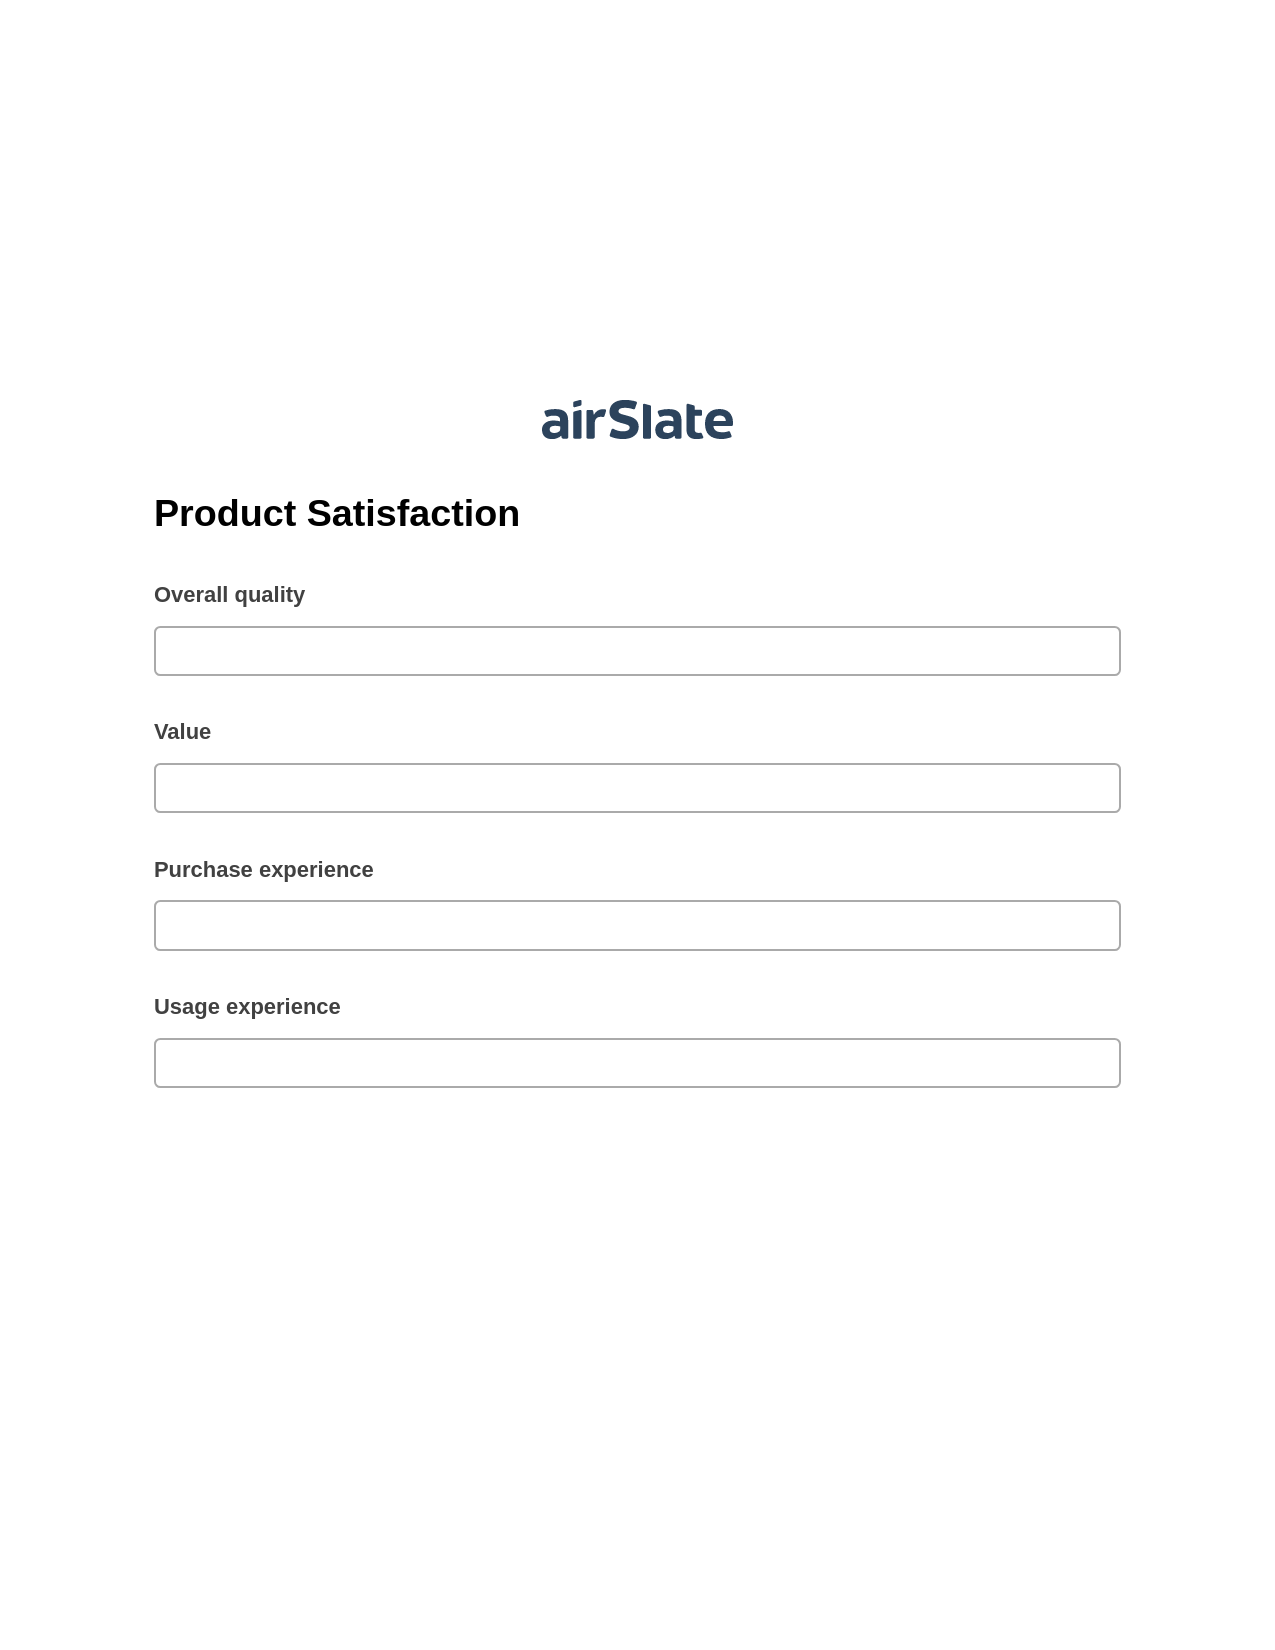 Product Satisfaction Pre-fill Dropdowns from Google Sheet Bot, Update Salesforce Record Bot, Archive to SharePoint Folder Bot